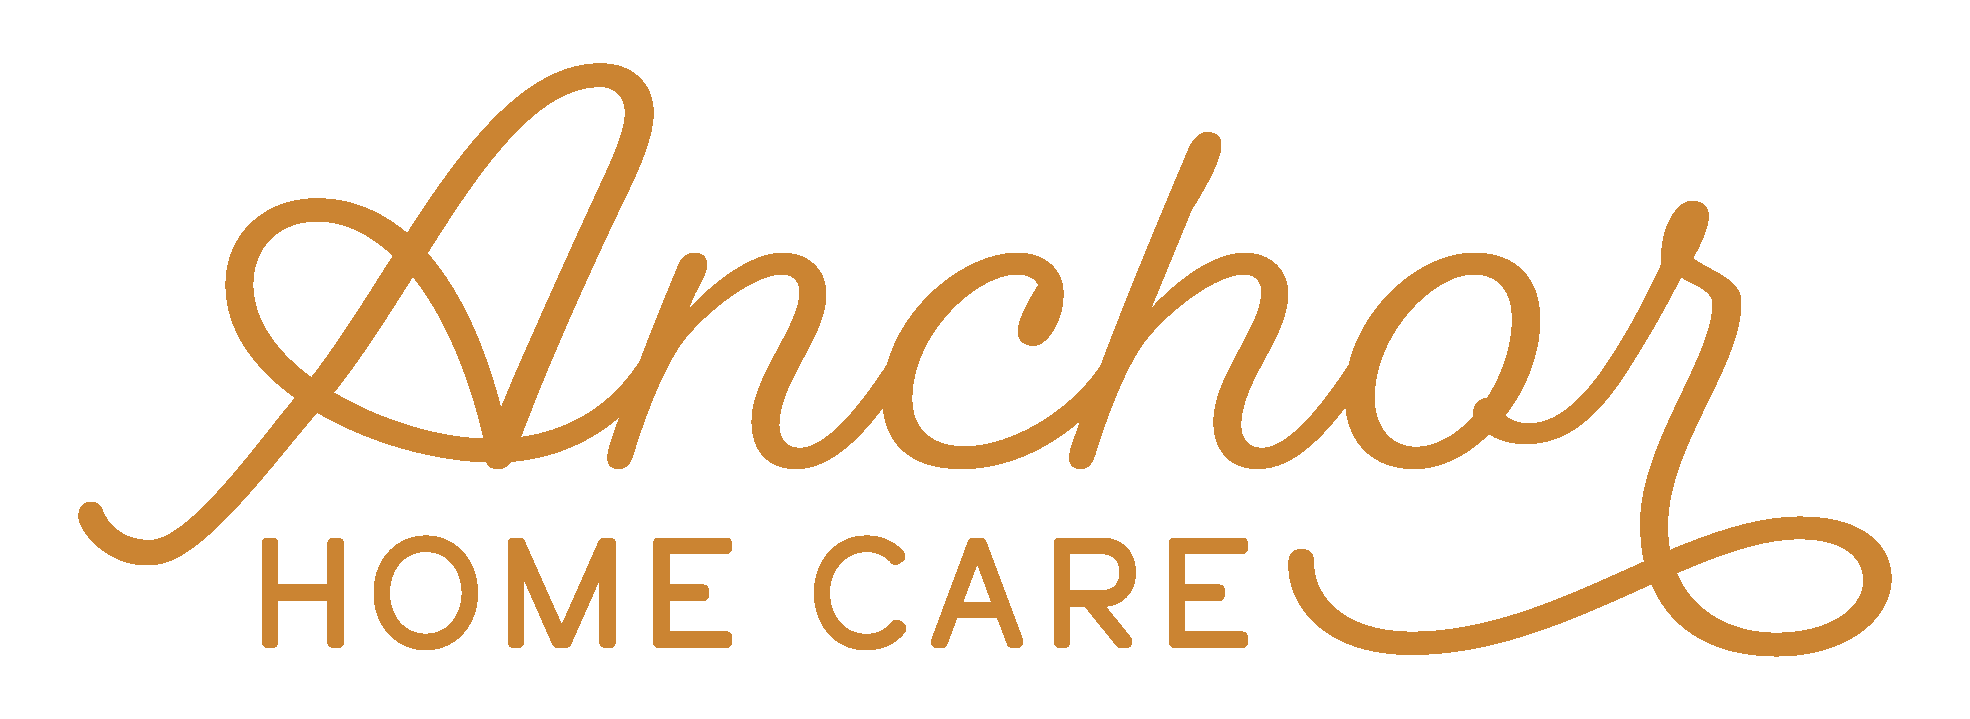 Anchor Home Care_Primary_Honey.png